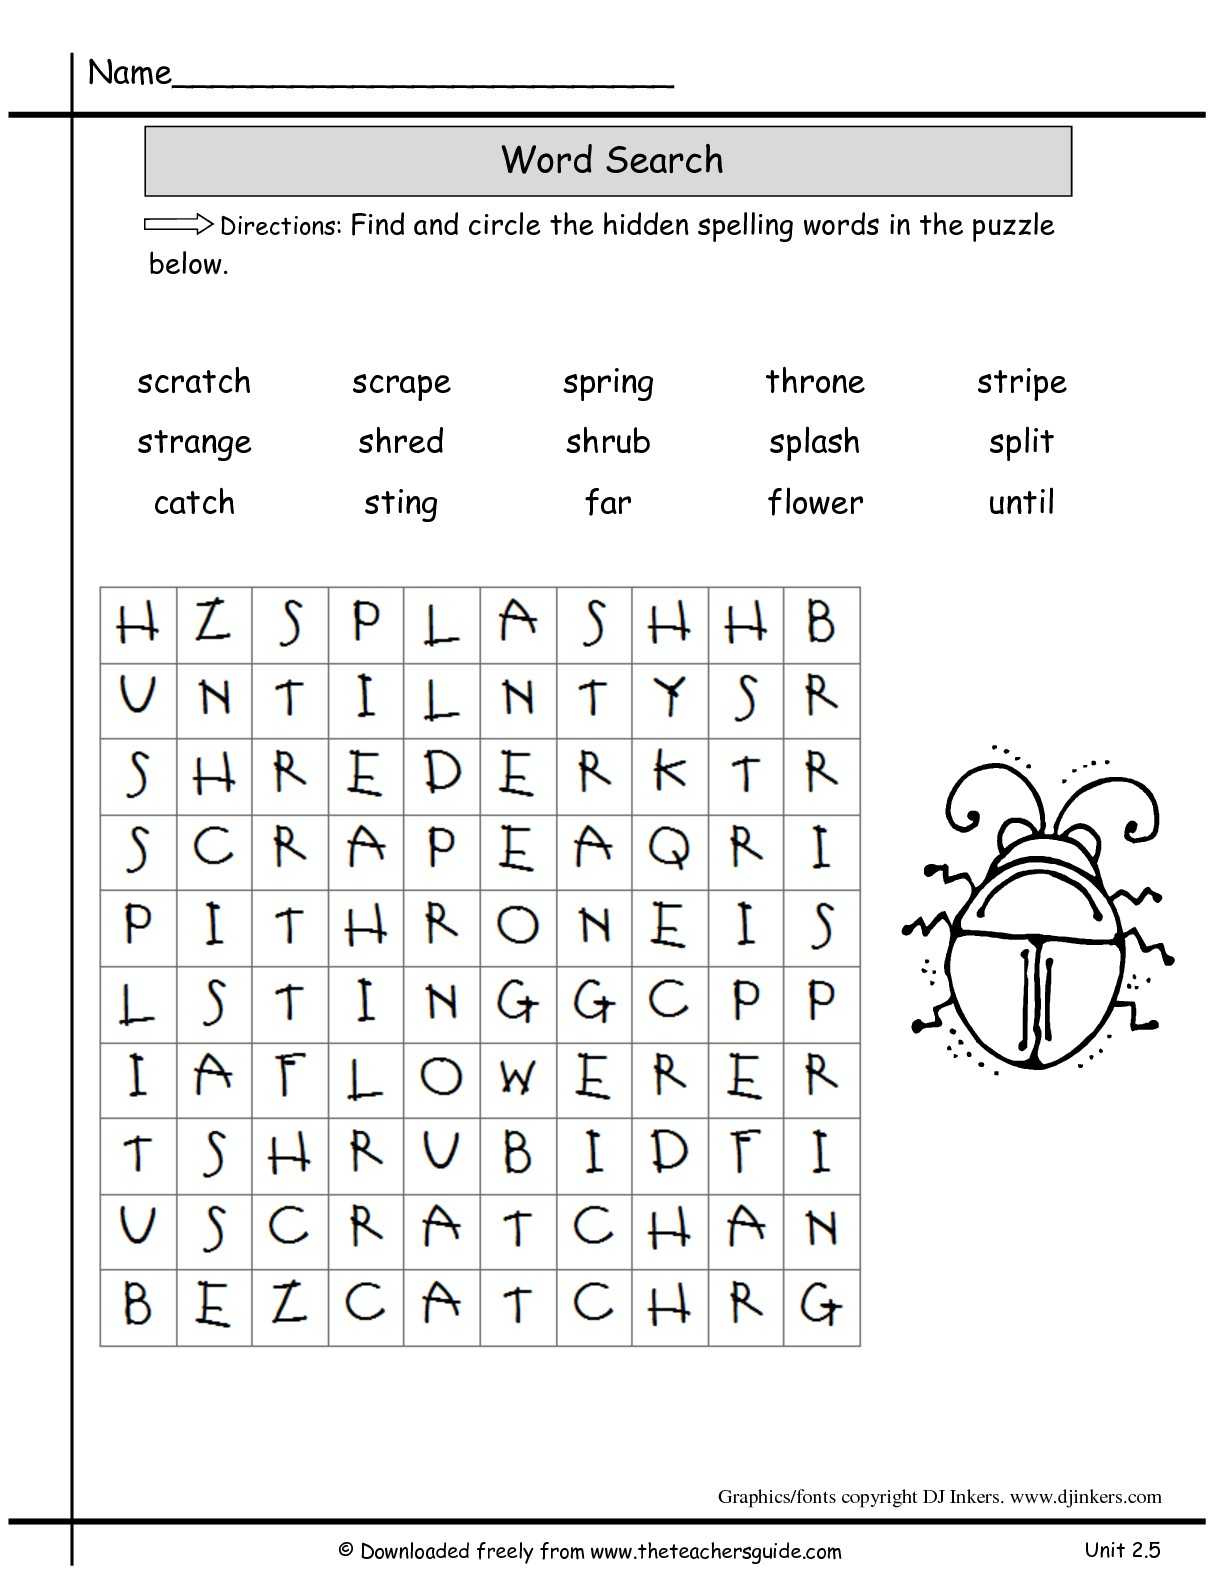 Exponential Growth and Decay Worksheet Answer Key Also Second Grade Word Search Worksheets the Best Worksheets Image